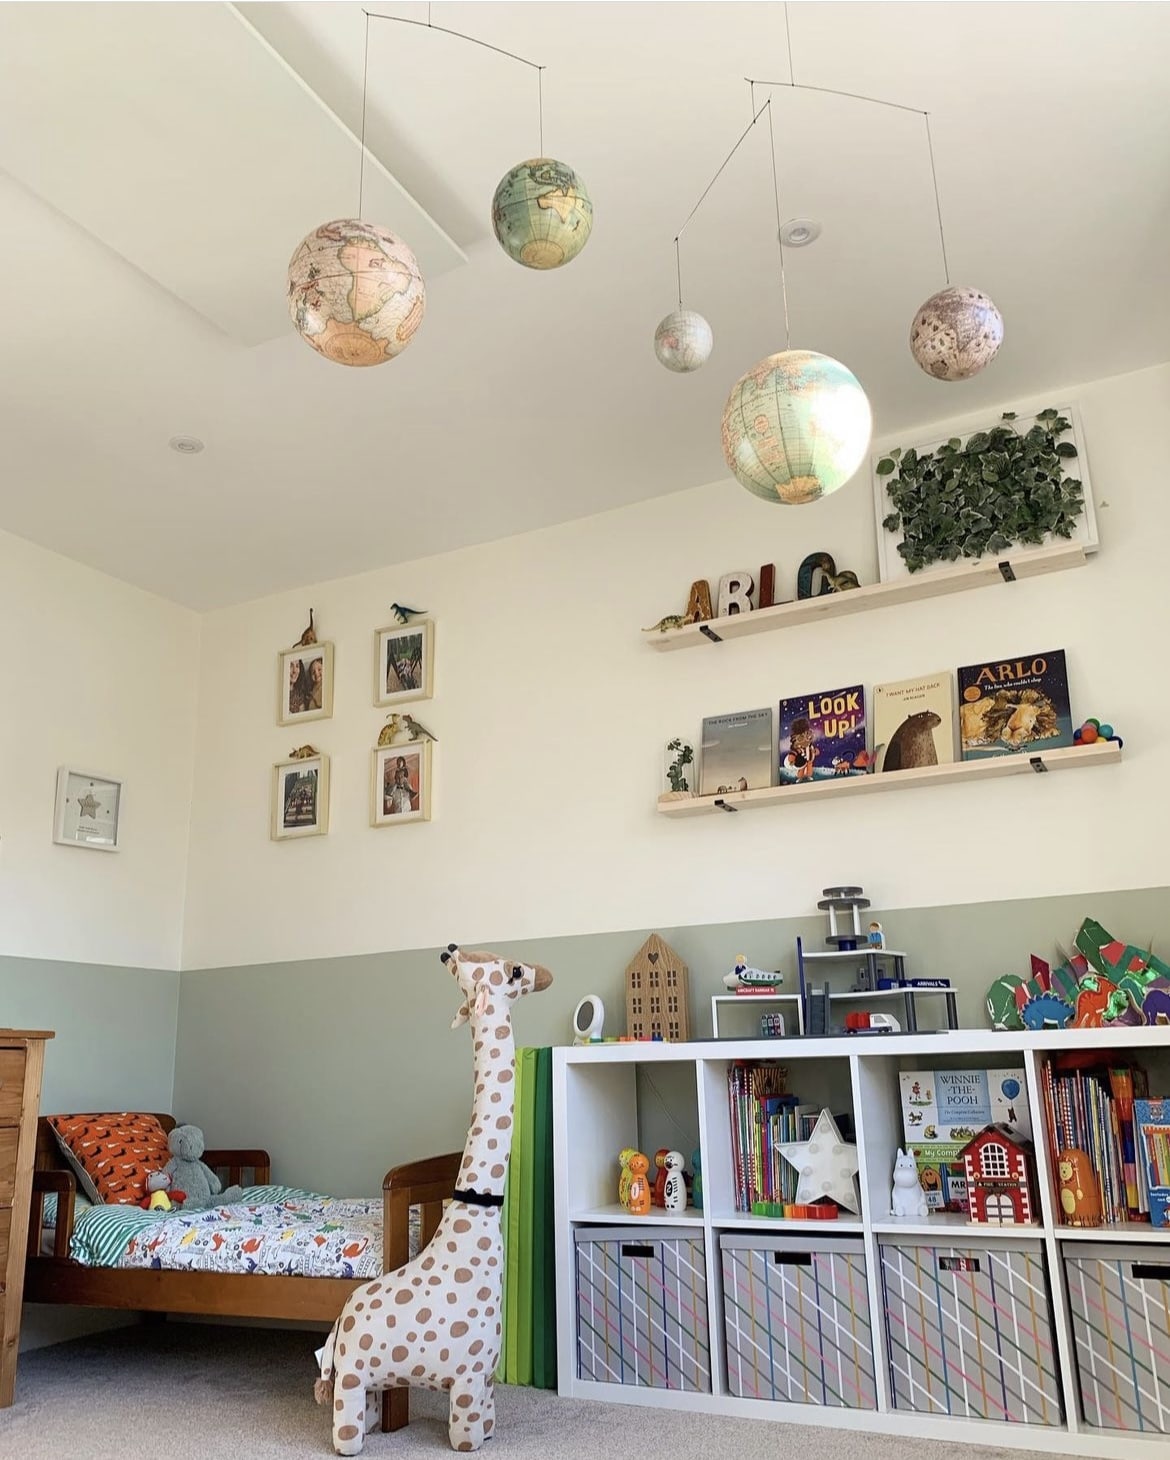 17 Delightful Farrow and Ball Children’s Bedroom Ideas That Are Full of ...